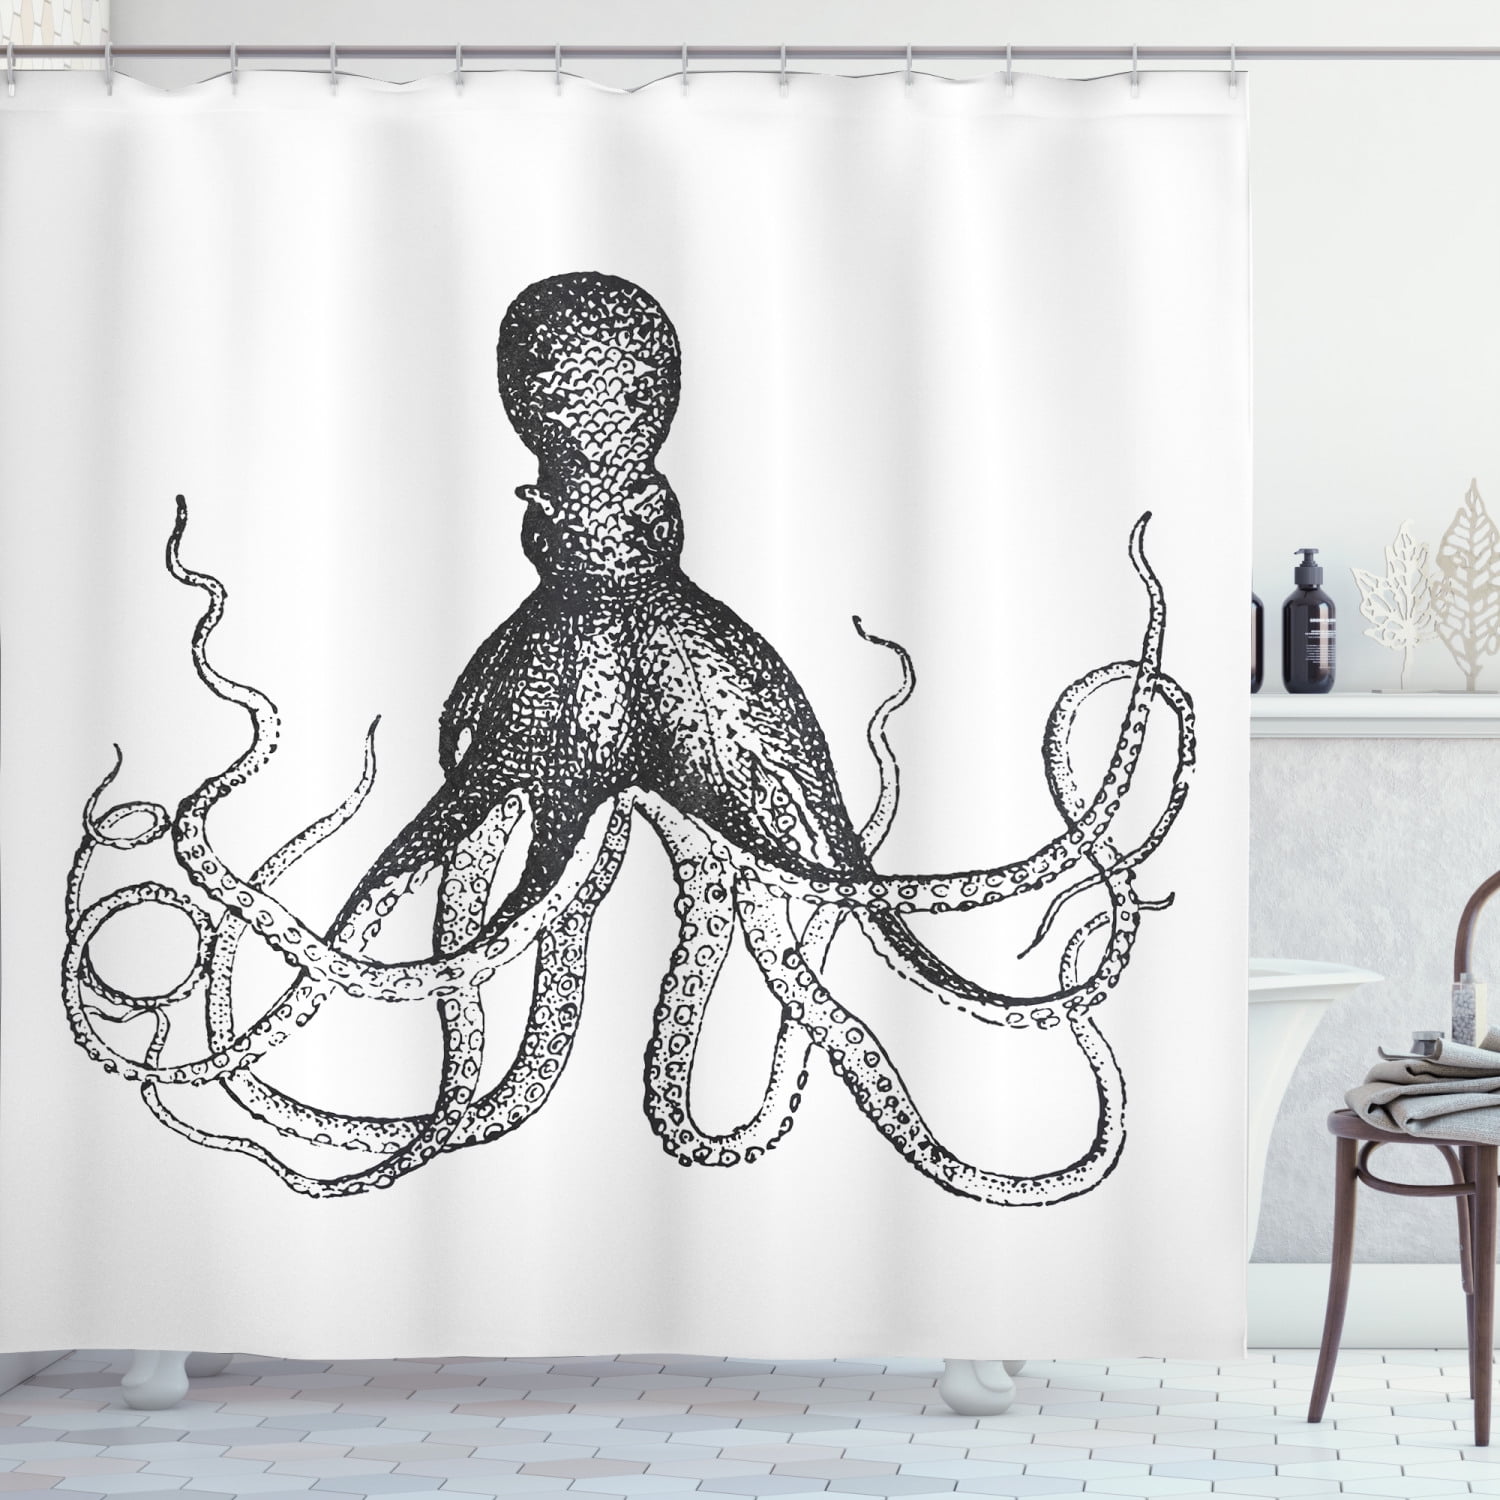 Nautical Anchor Rustic Wooden Planks Shower Curtain Extra Long 84 Inch 